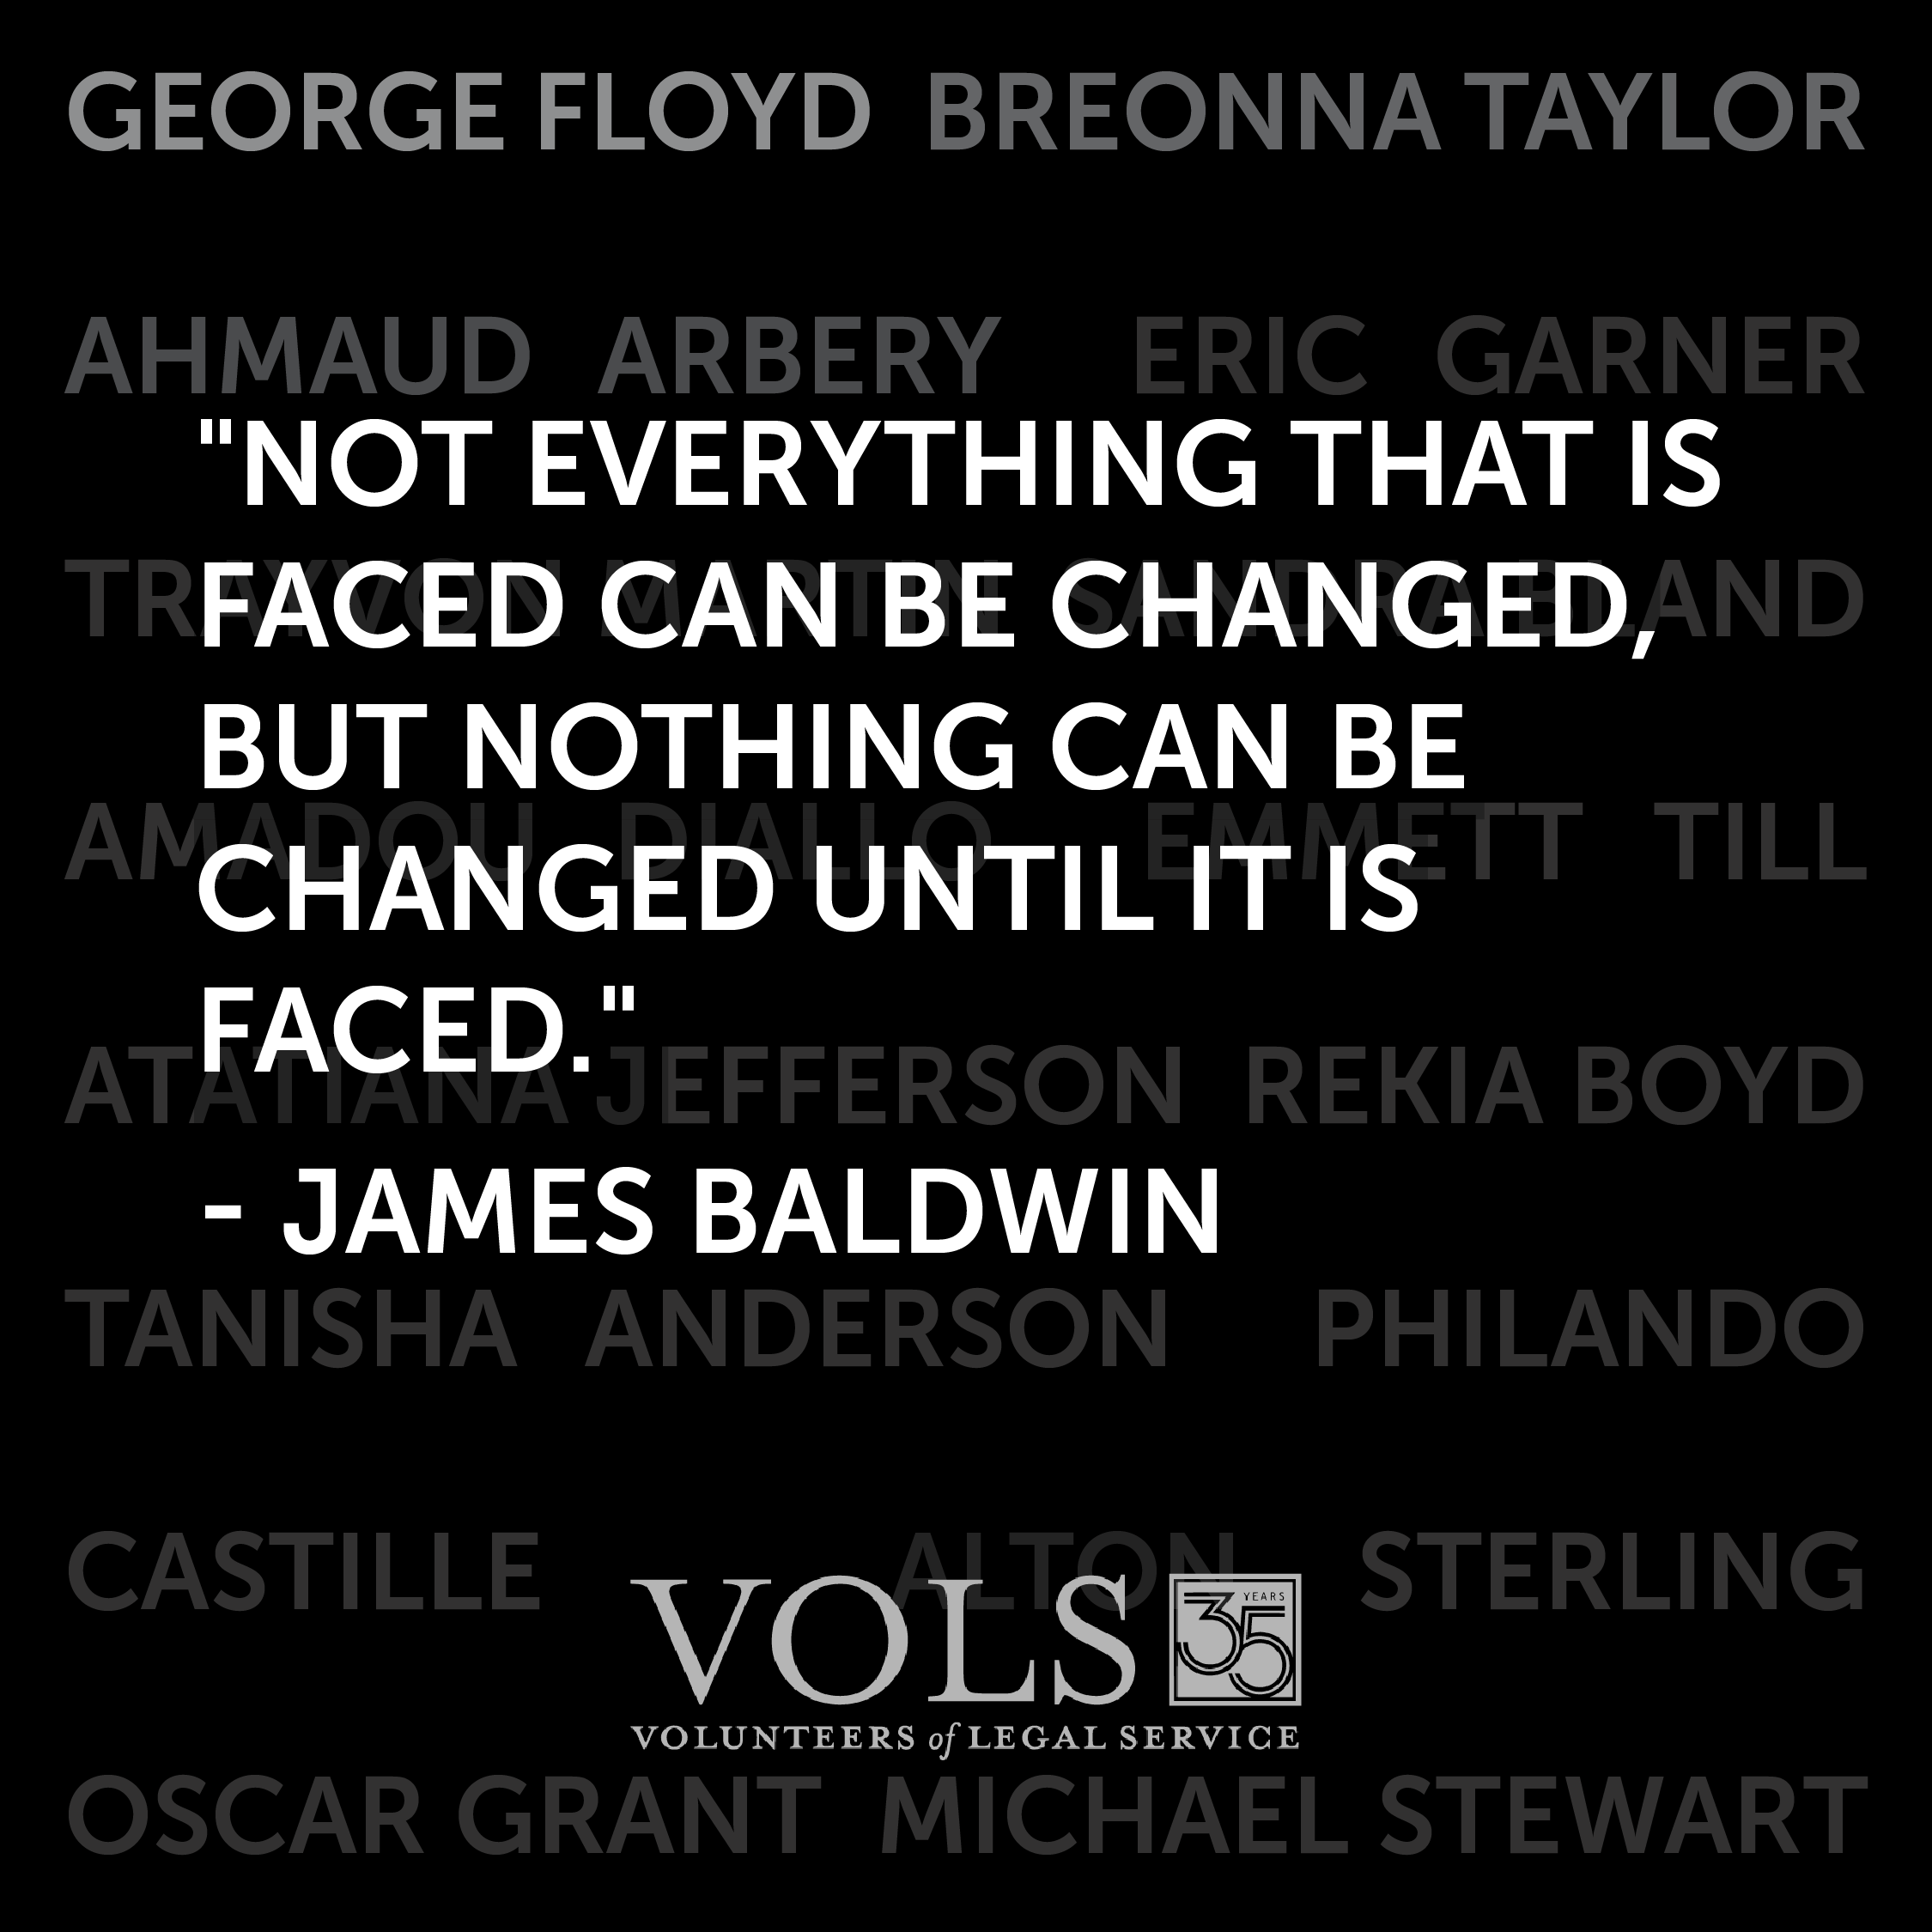 Nothing can be changed until it is faced - James Baldwin